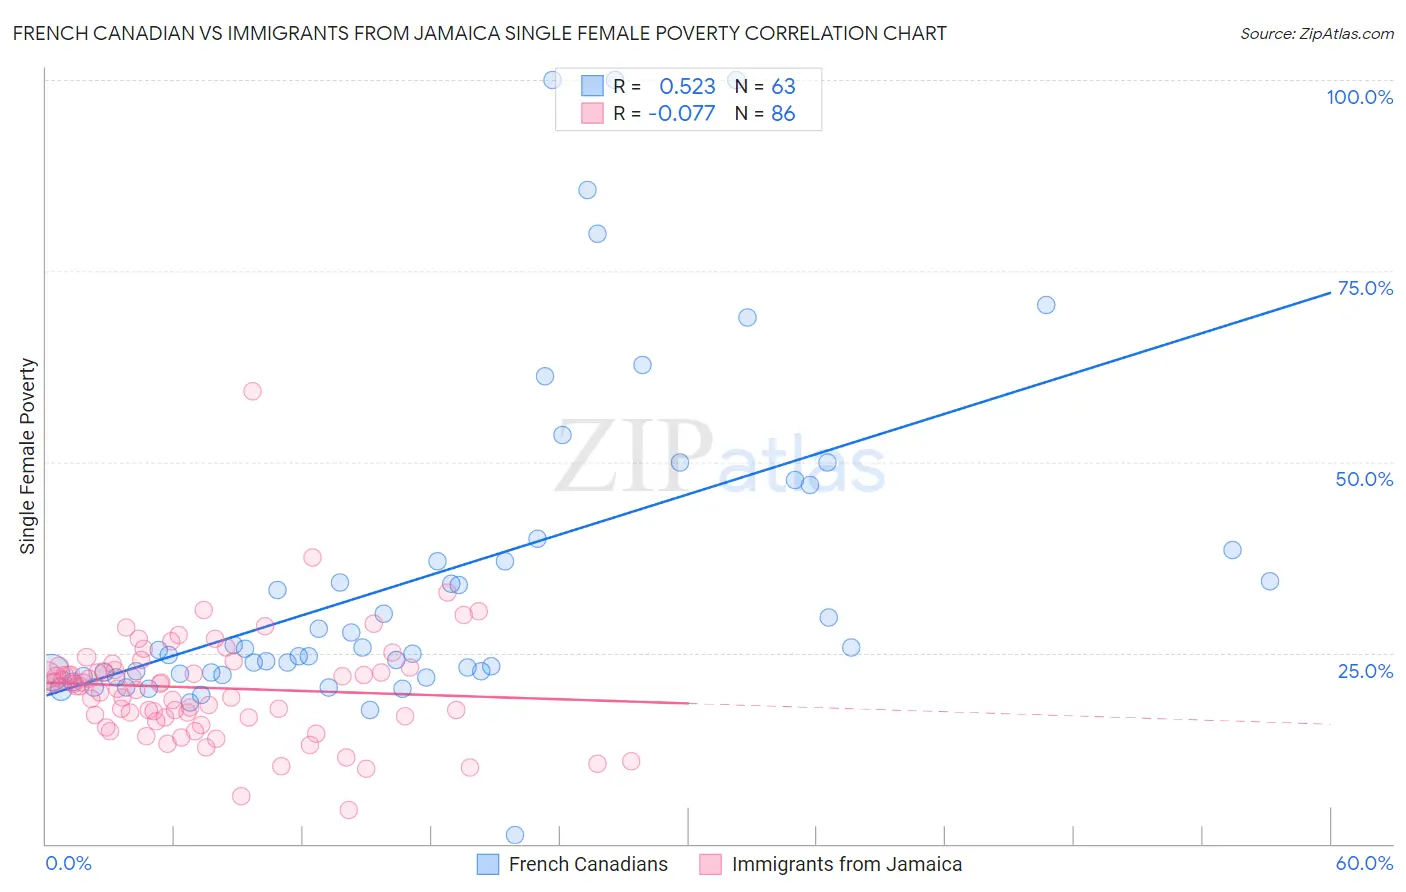 French Canadian vs Immigrants from Jamaica Single Female Poverty